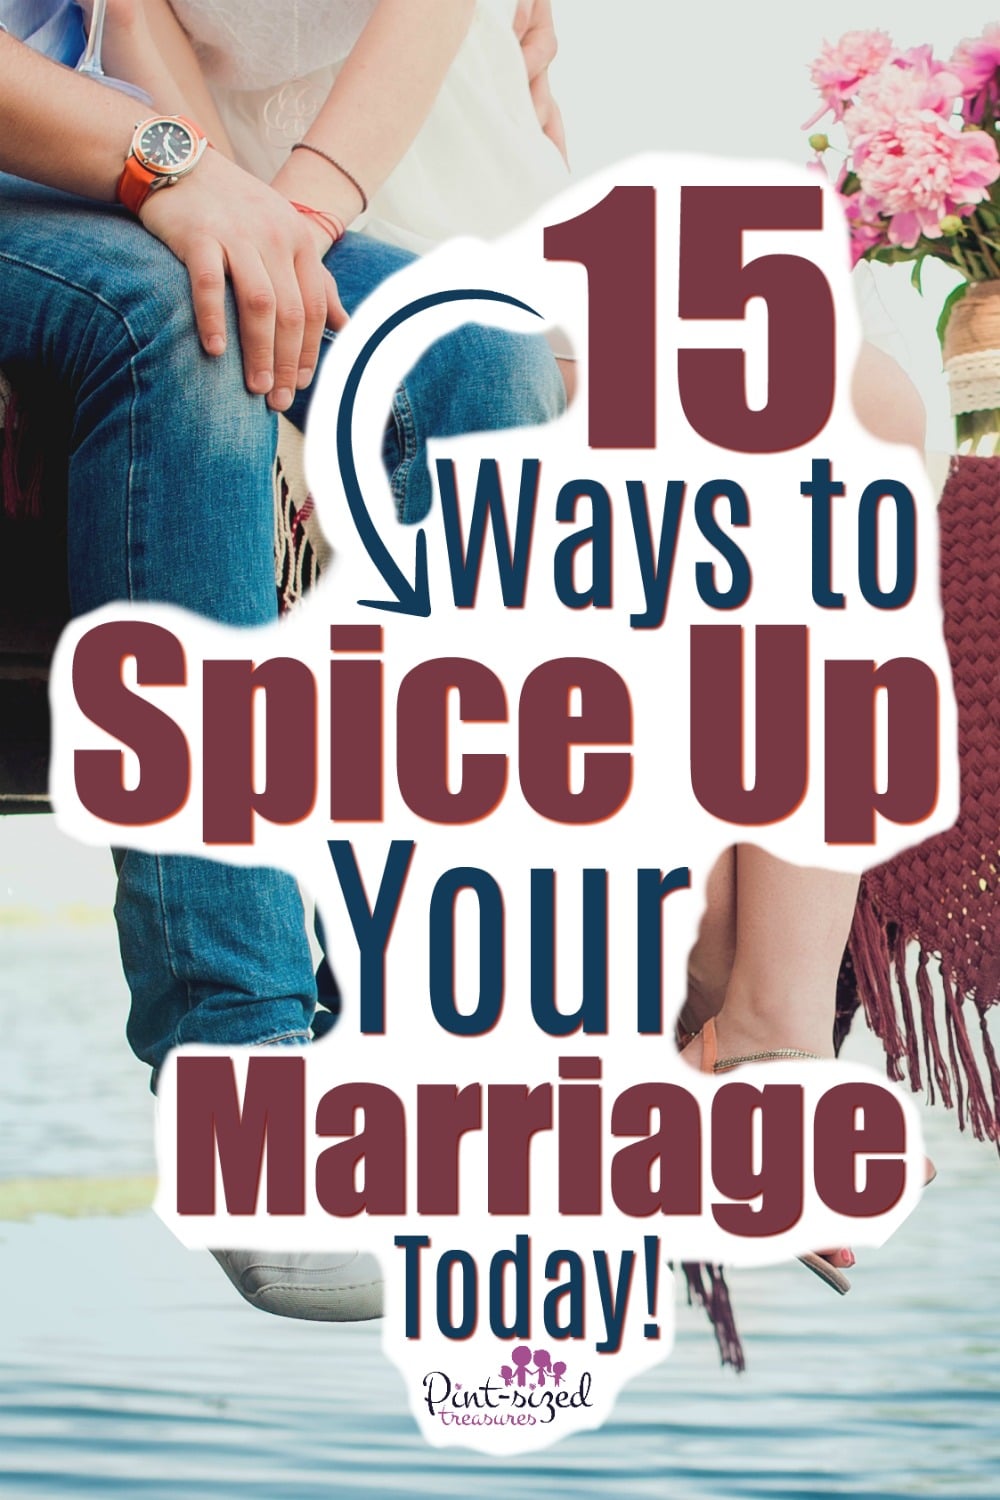 How to spice up your marriage